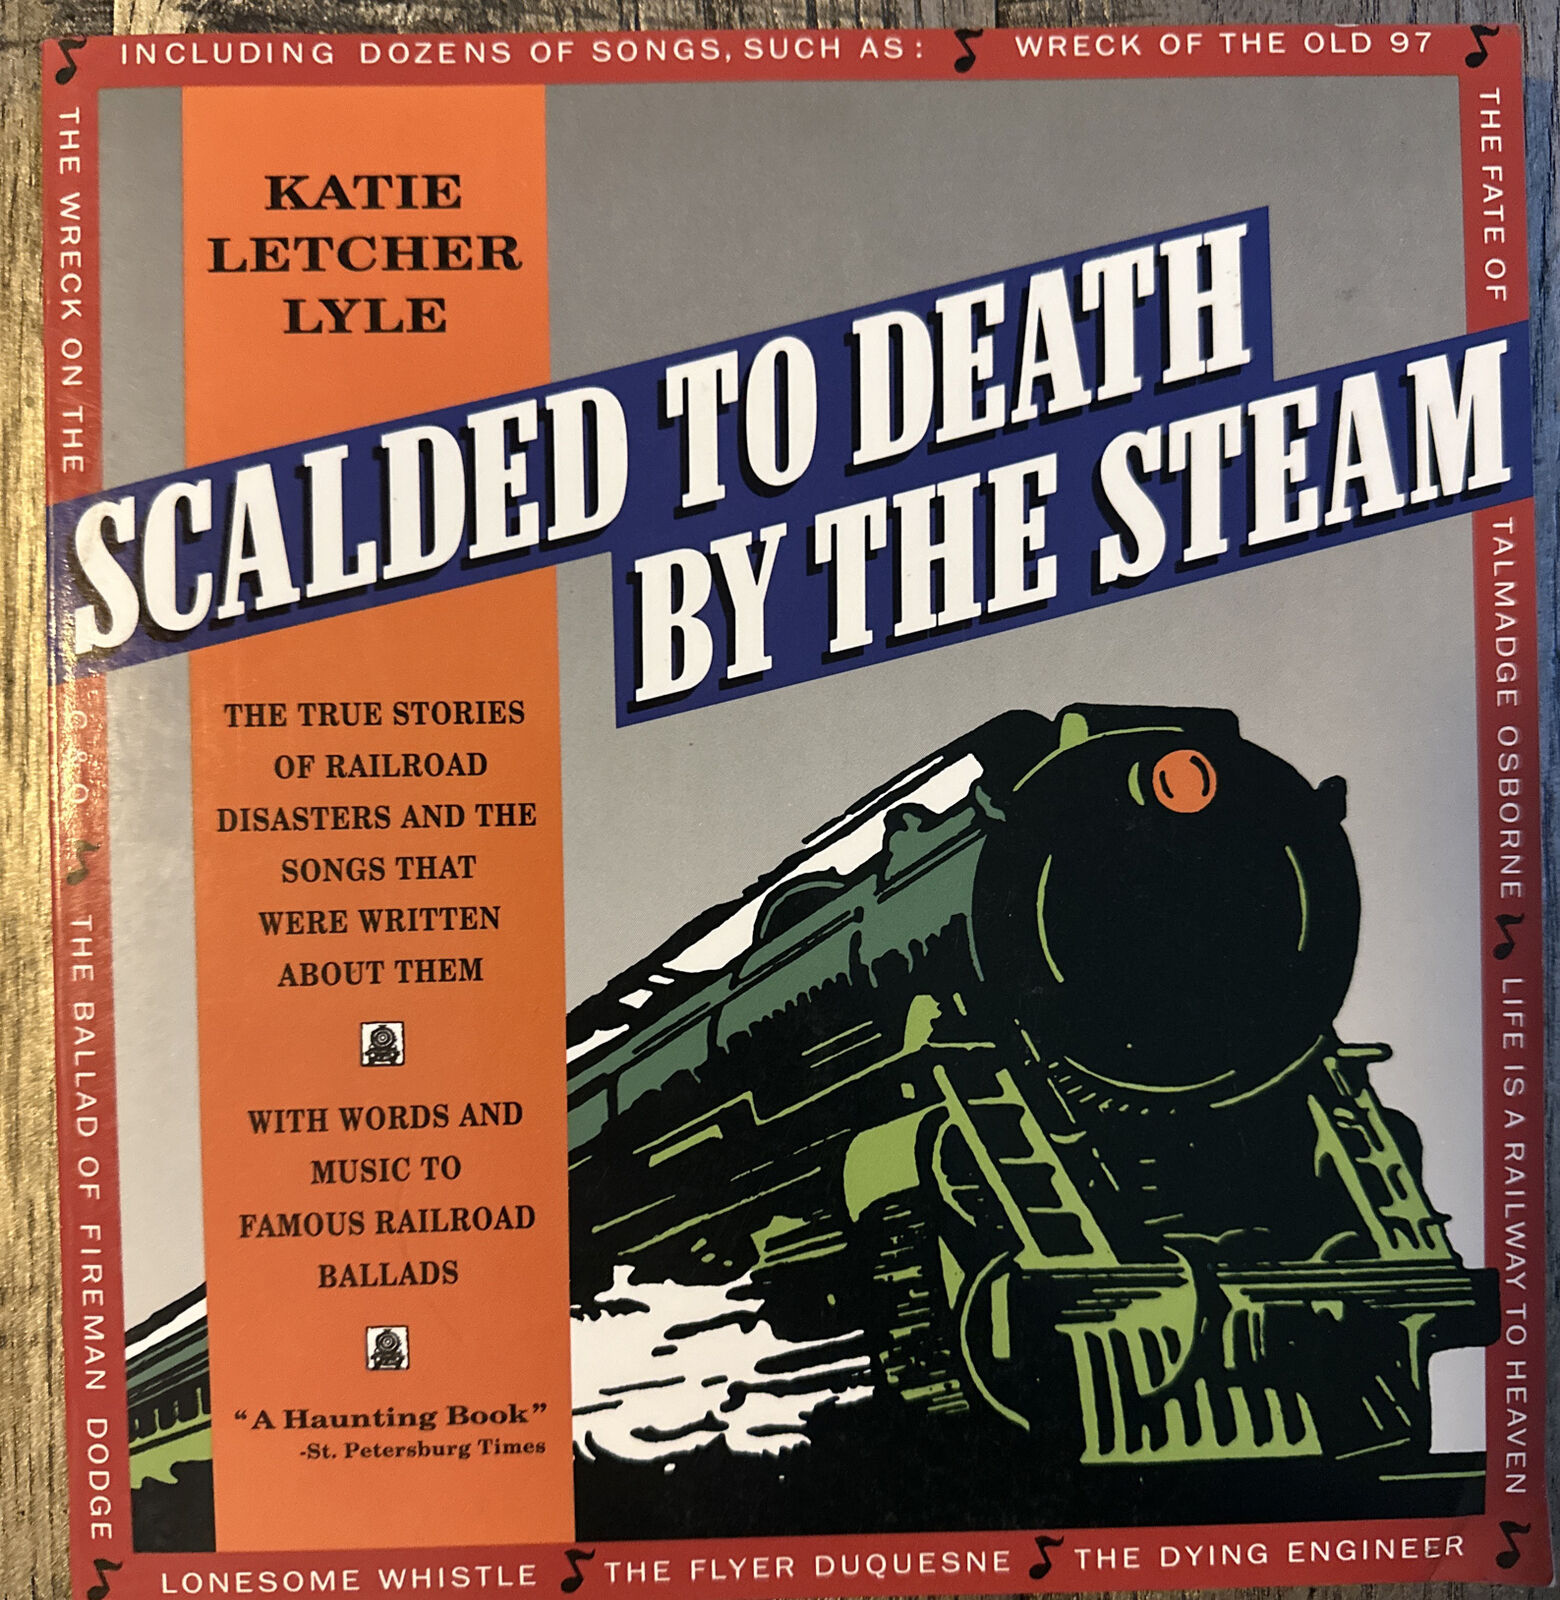 Scalded to Death by the Steam: Stories of Railroad Disasters… by Katie Lyle NEW